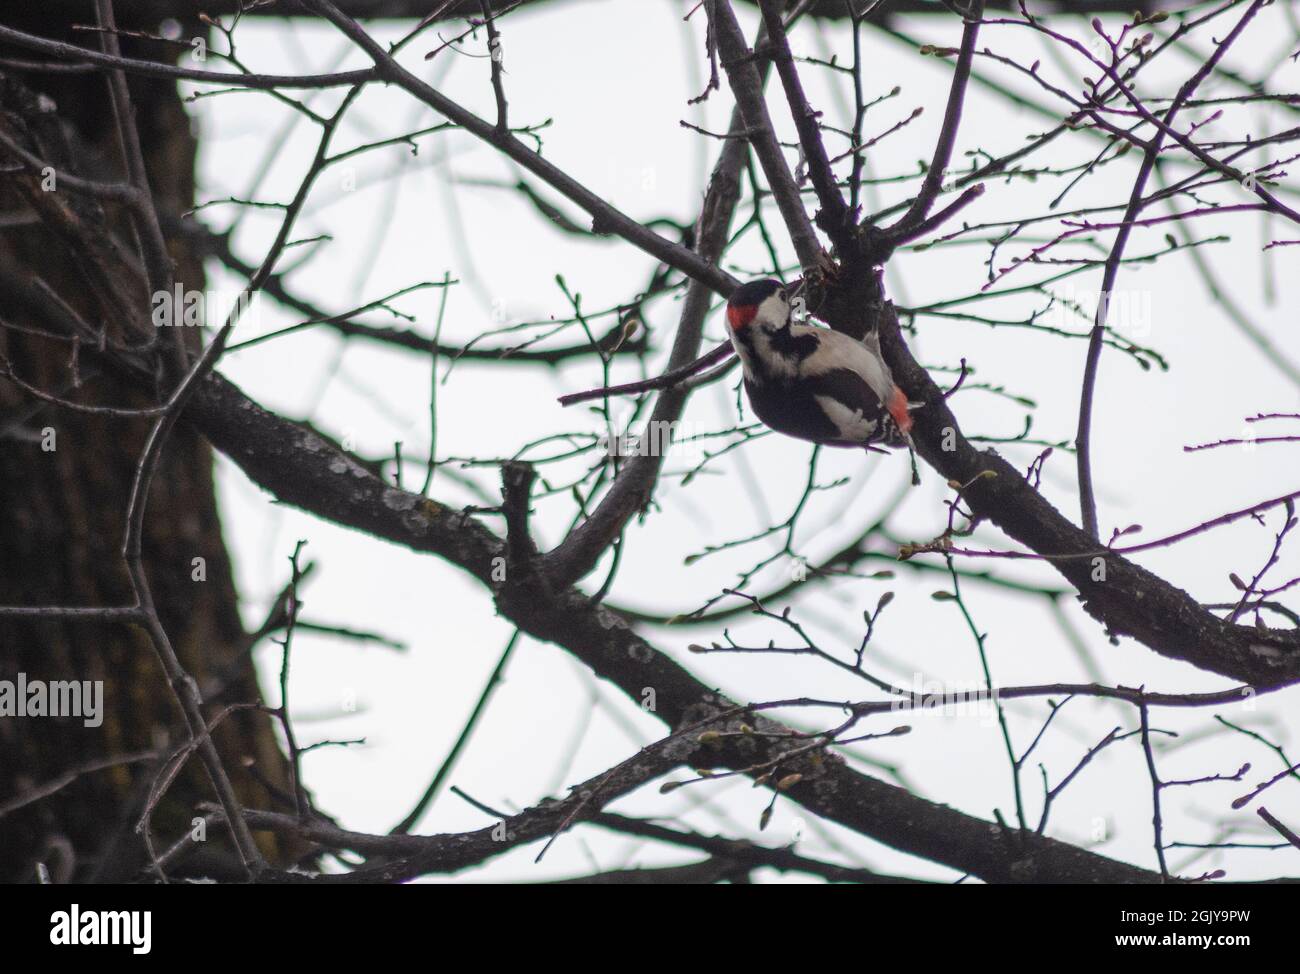 A Syrian woodpecker (Dendrocopos syriacus) on the nranch of a tree in the forests of the Carpathian Mountains in Transylvania Romania Stock Photo